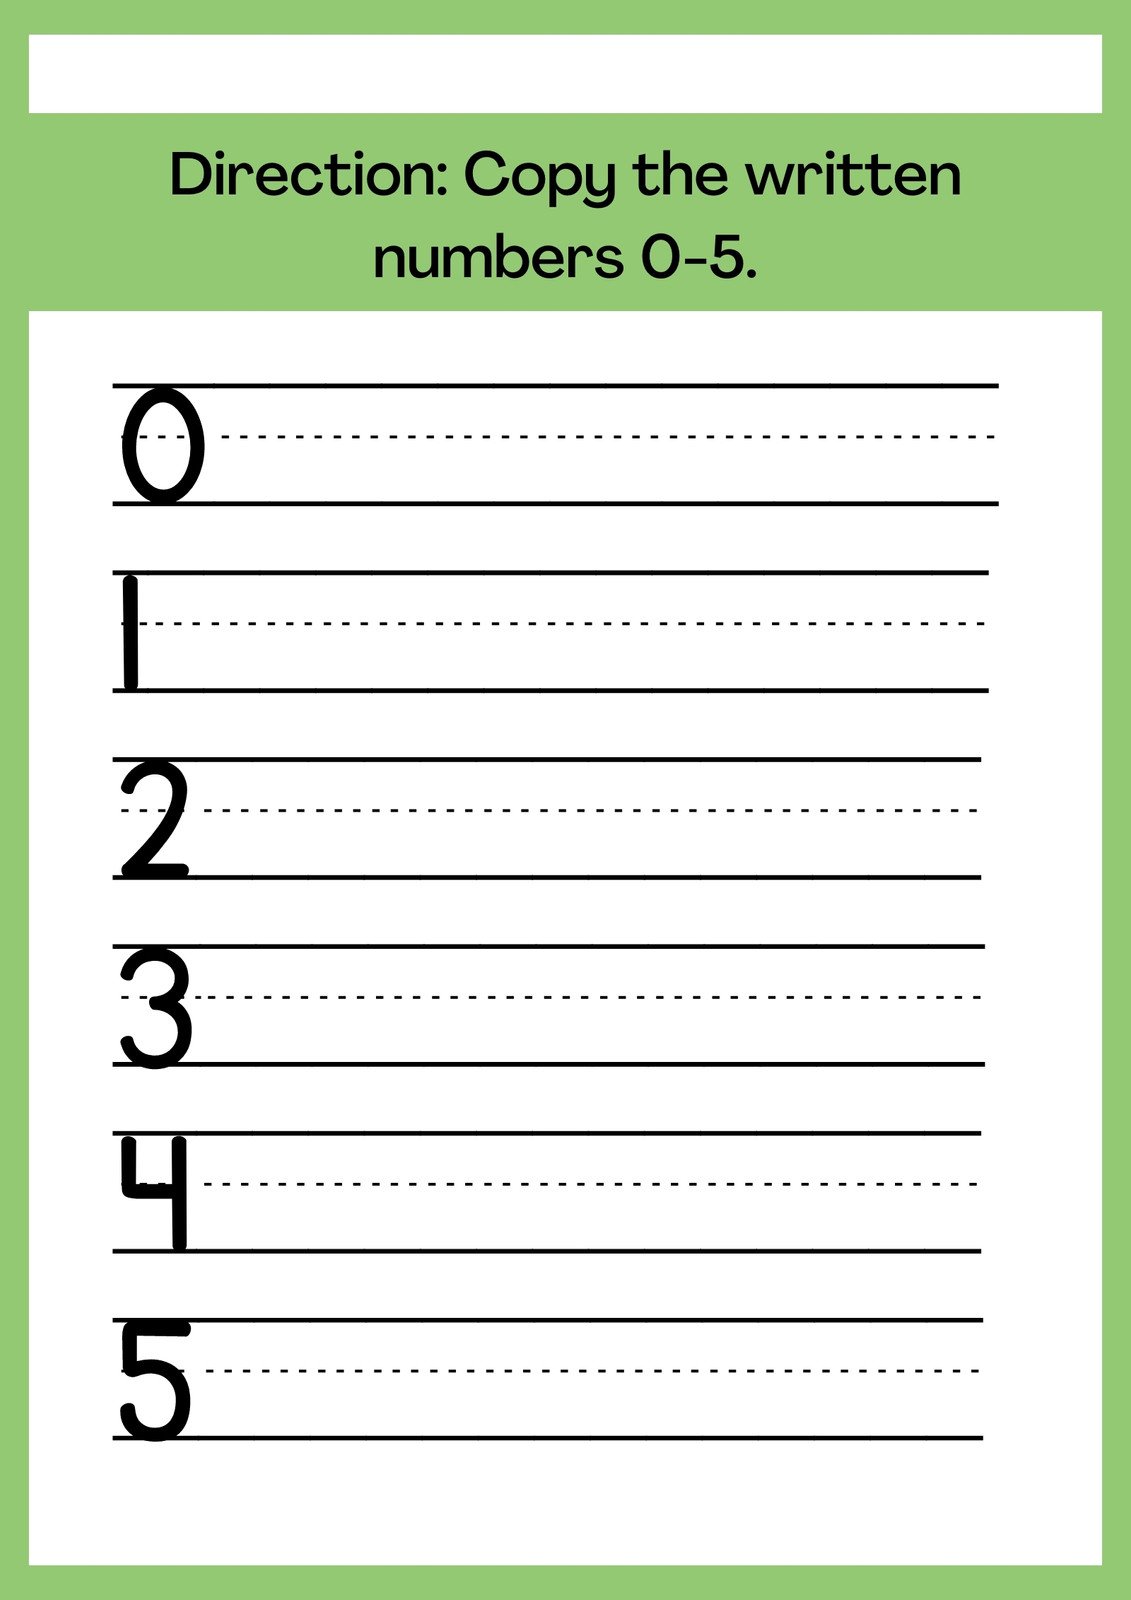 Top 10 Worksheets To Practice Writing The Alphabet - Teaching Expertise